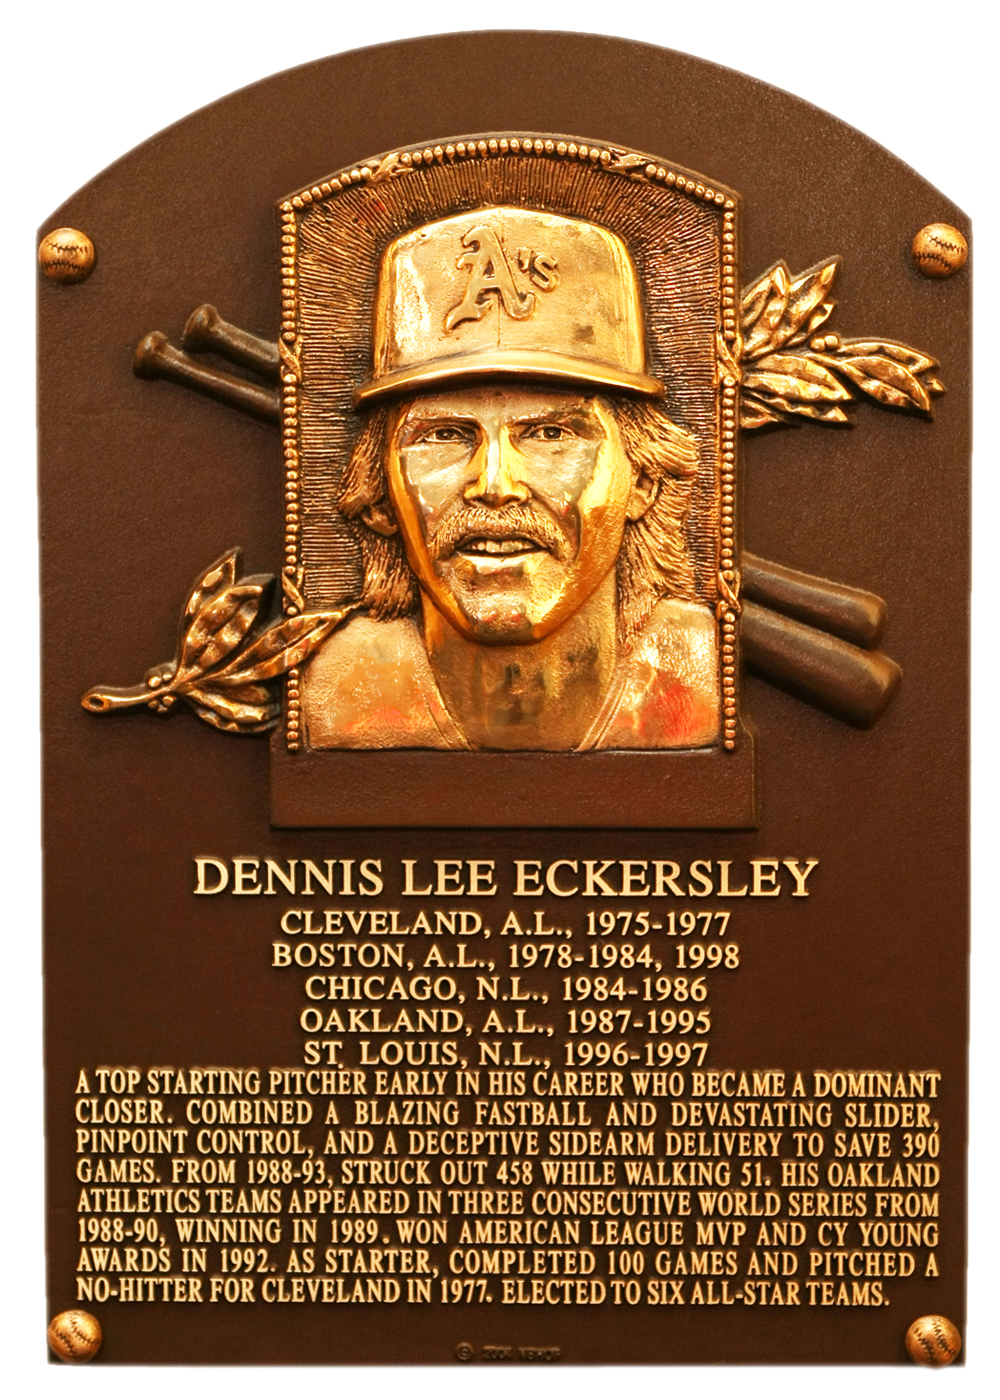 Dennis Eckersley Hall of Fame plaque